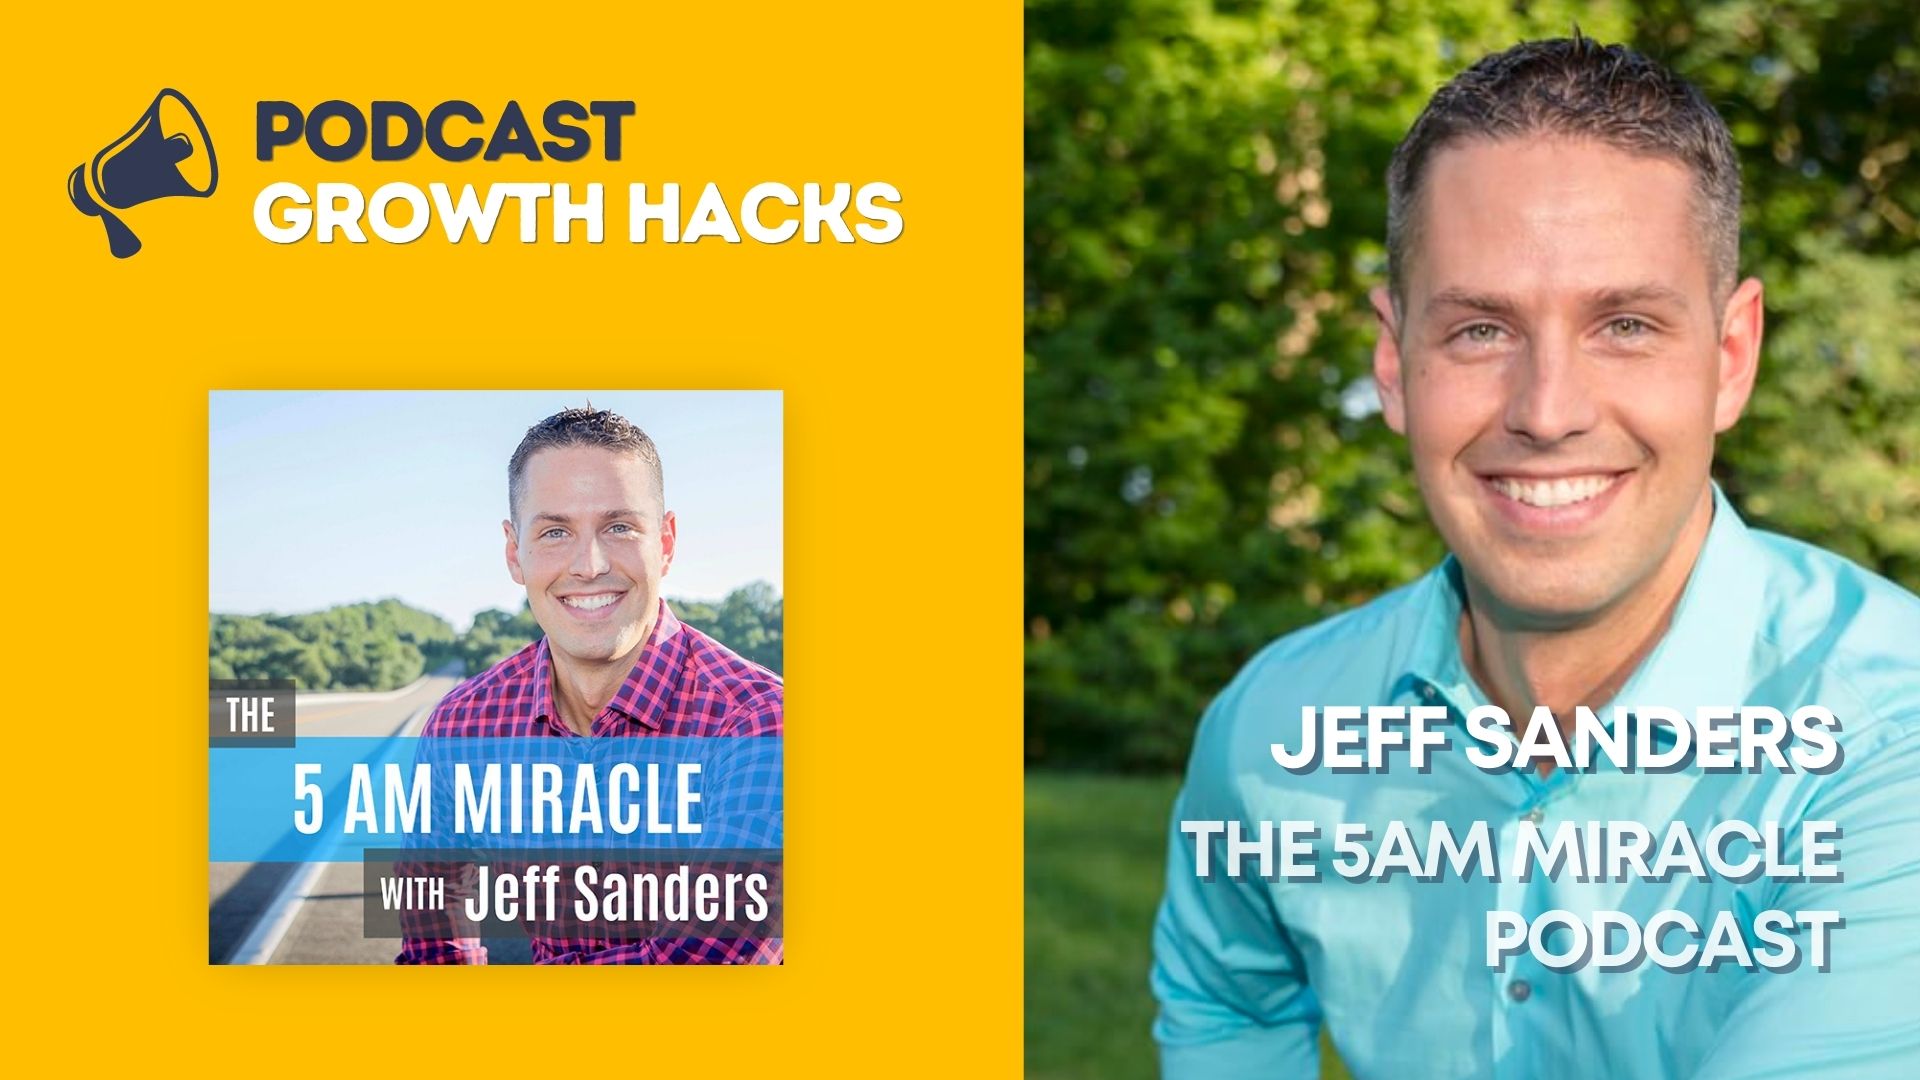 Jeff Sanders - The 5am Miracle Podcast - Podcast Growth Hacks